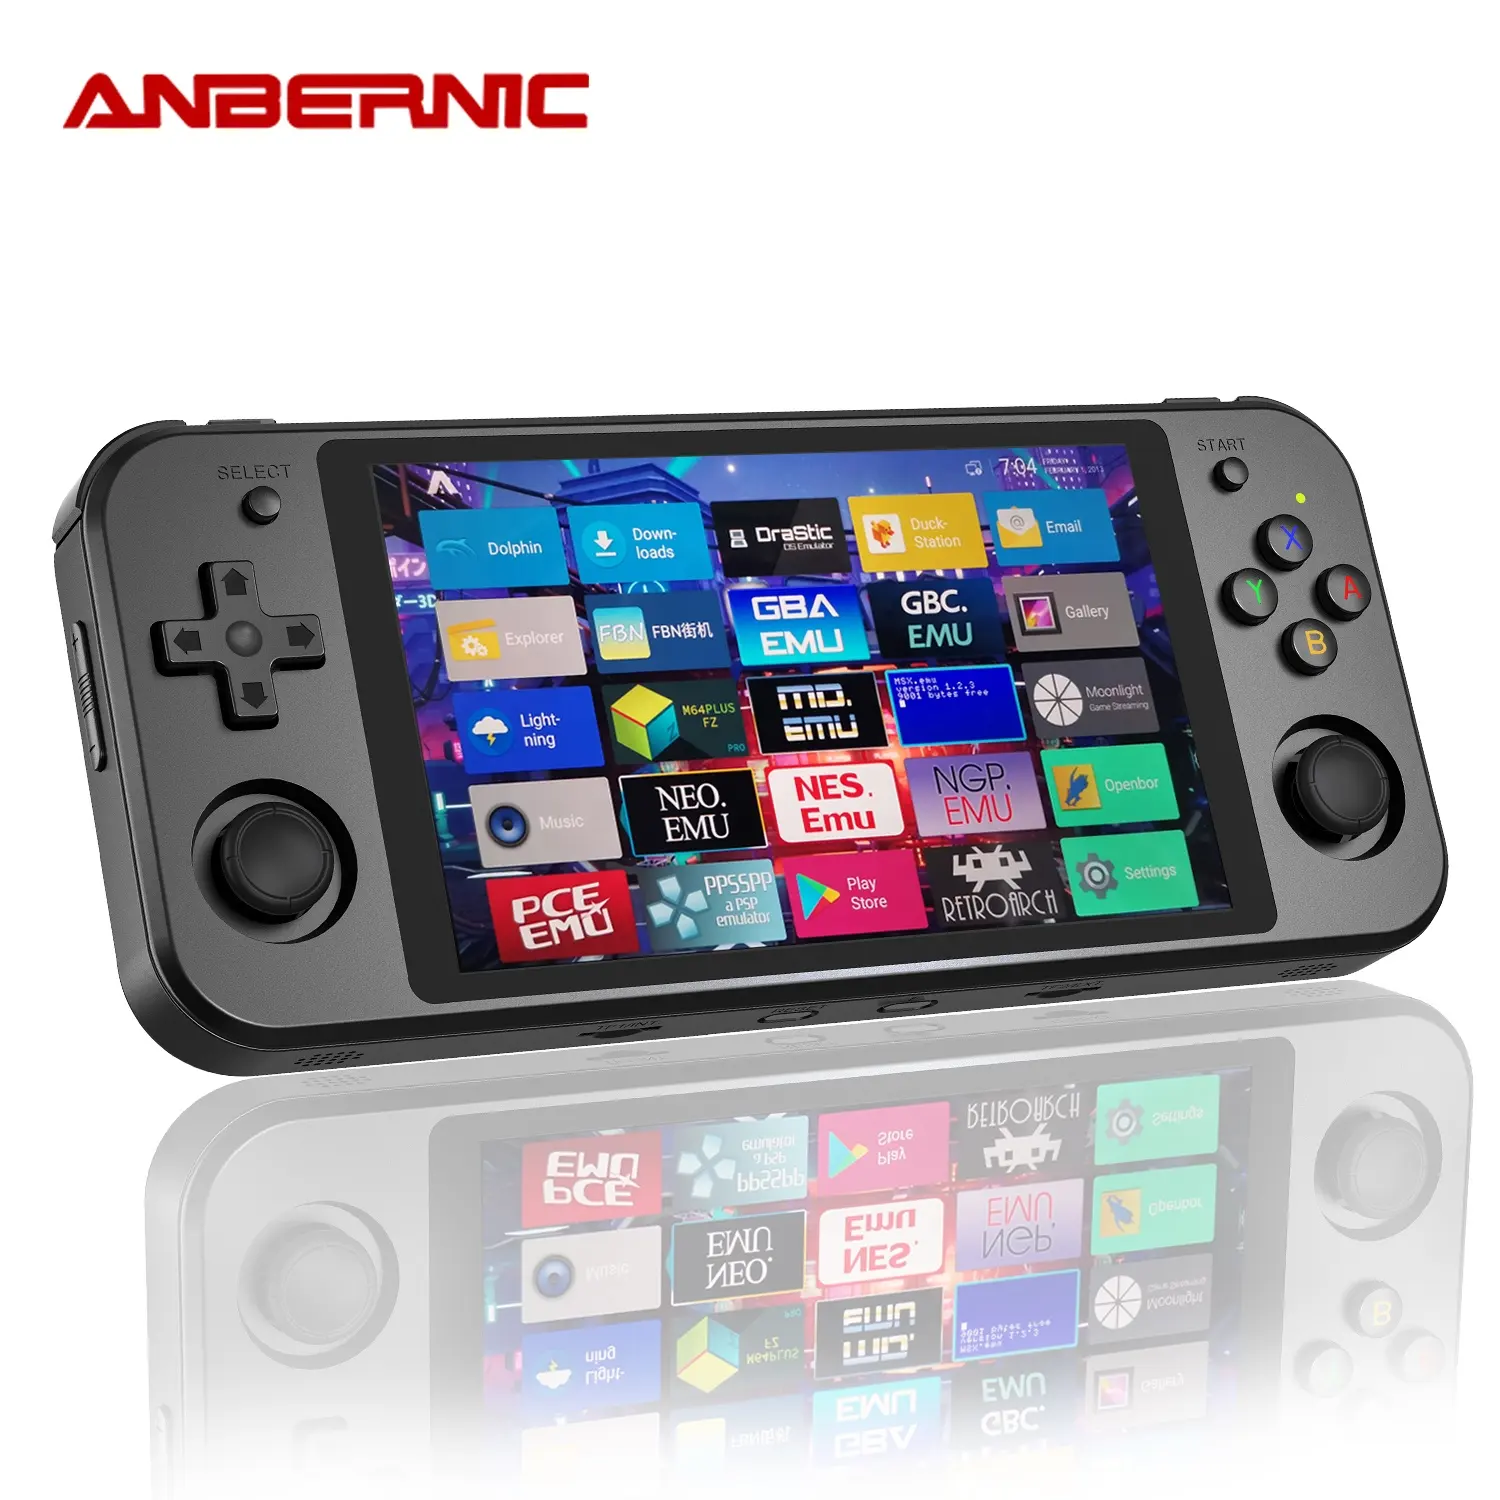 ANBERNIC Handheld Game Console RK3399 Linux Android Dual System 5.36 inch OCA Screen RG552 Retro Player Best PC Gaming